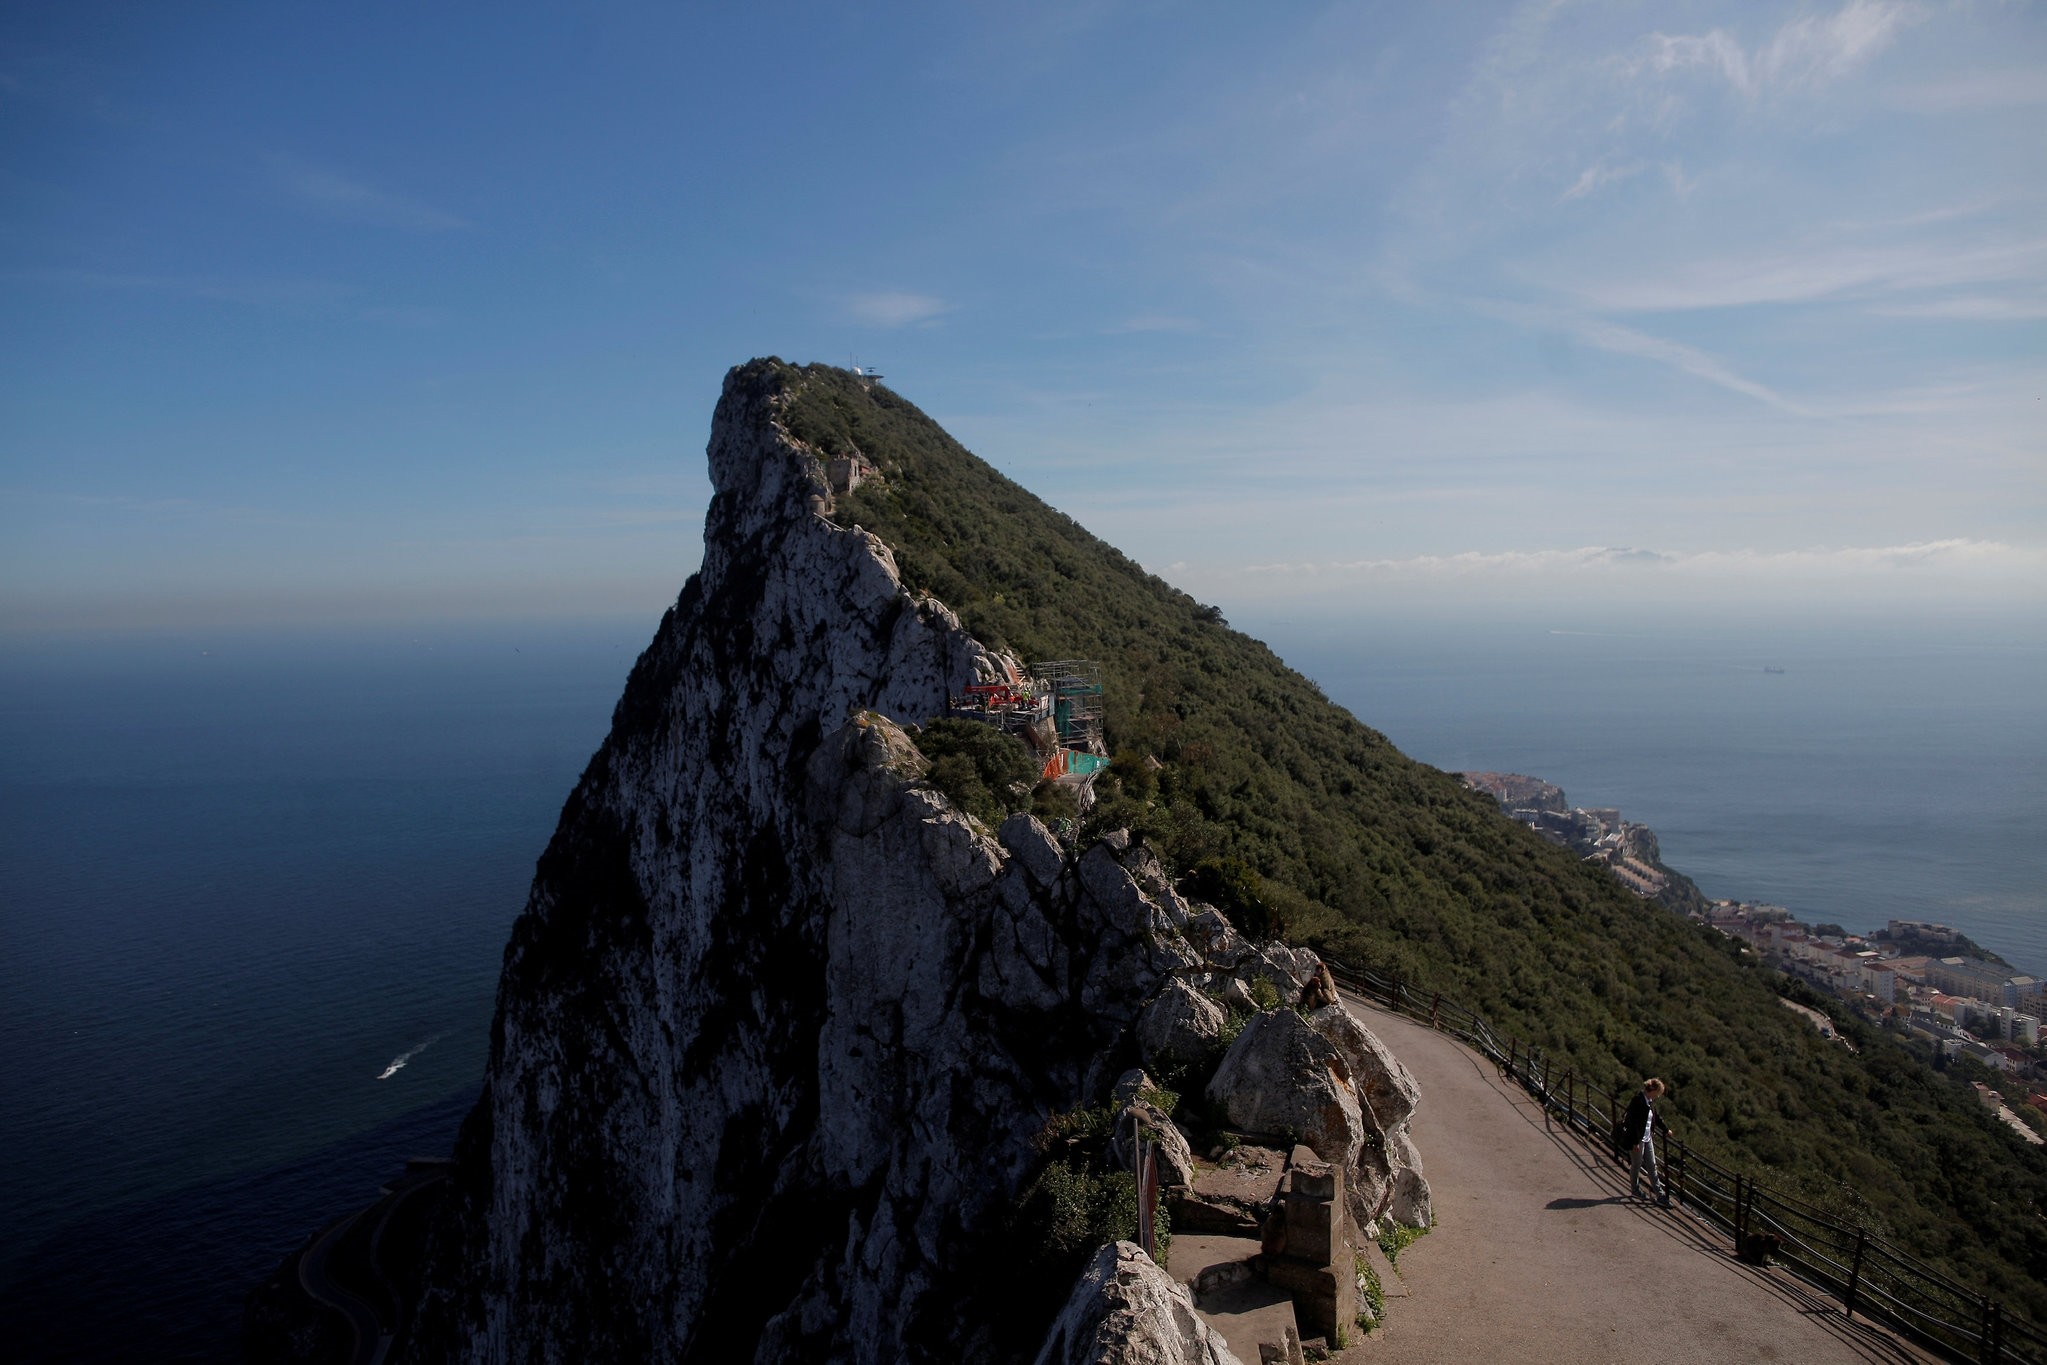 The Rock in the British overseas territory of Gibraltar, historically claimed by Spain, March 29, 2017. (REUTERS Photo)